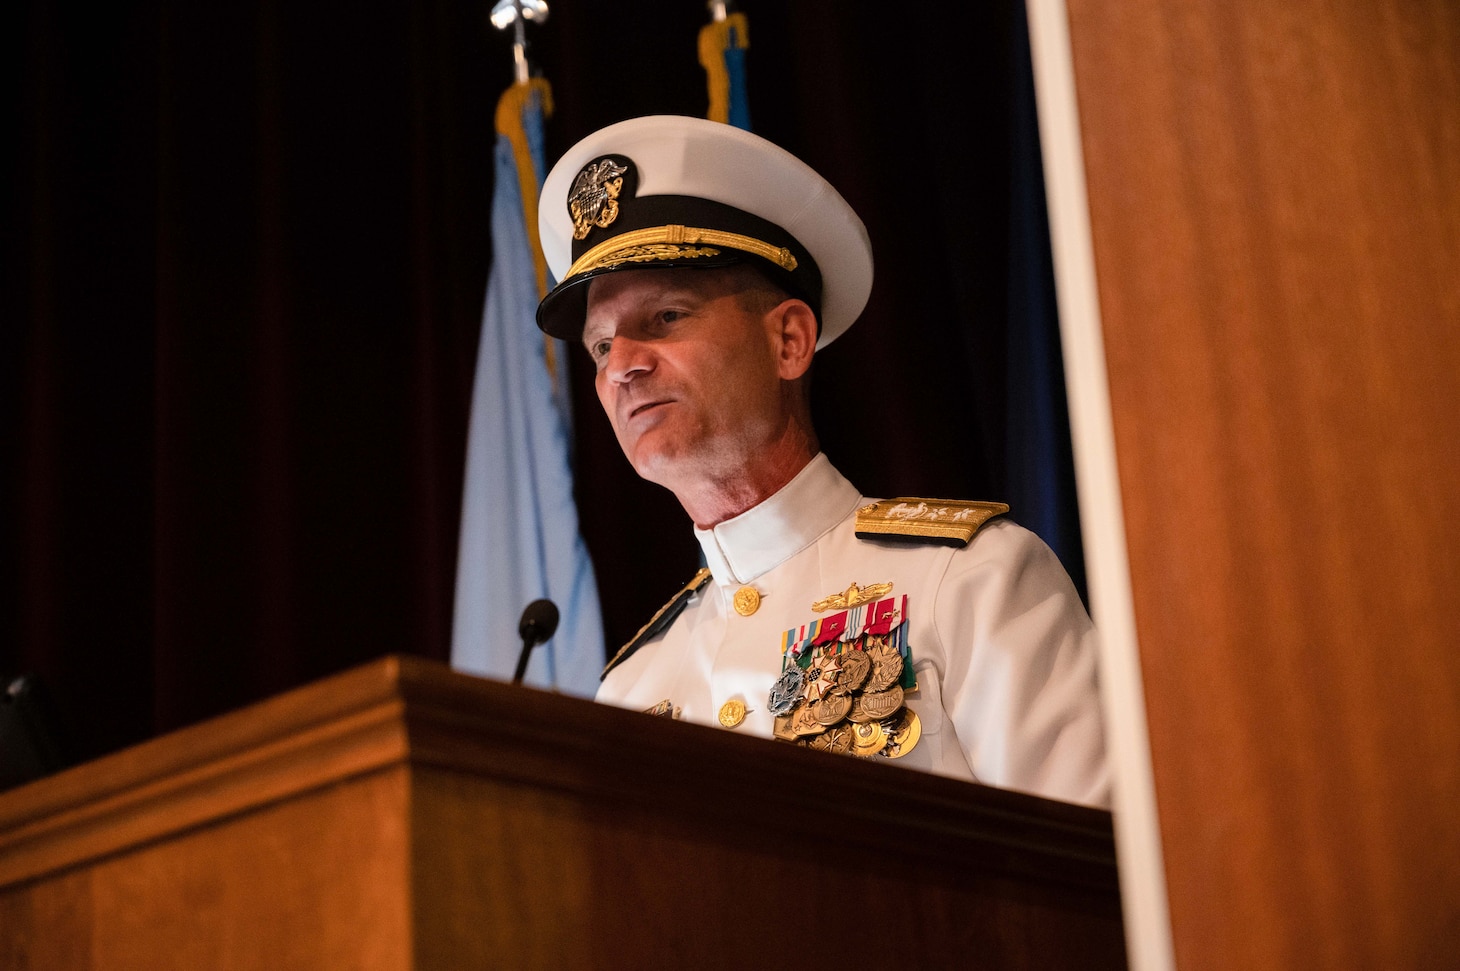 Rear Adm. Michael J. Steffen relieved Rear Adm. John A. Schommer as commander, Navy Reserve Forces Command (CNRFC) during a change of command ceremony at the Joint Forces Staff College in Norfolk, Virginia, July 11. (U.S. Navy photo by Mass Communication Specialist 2nd Class Tyra Campbell)